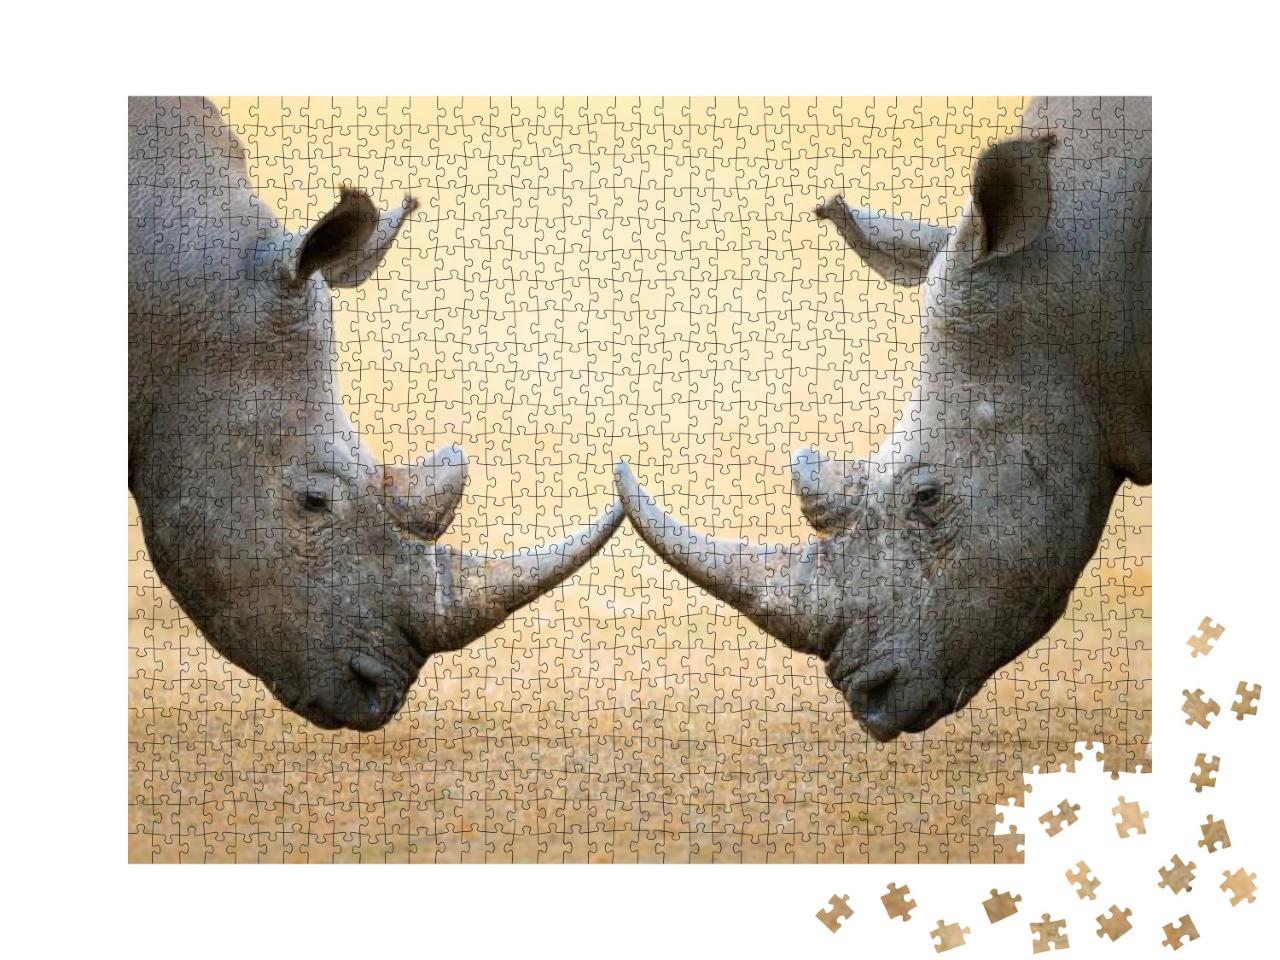 White Rhinoceros Ceratotherium Simum Head to Head - Kruge... Jigsaw Puzzle with 1000 pieces